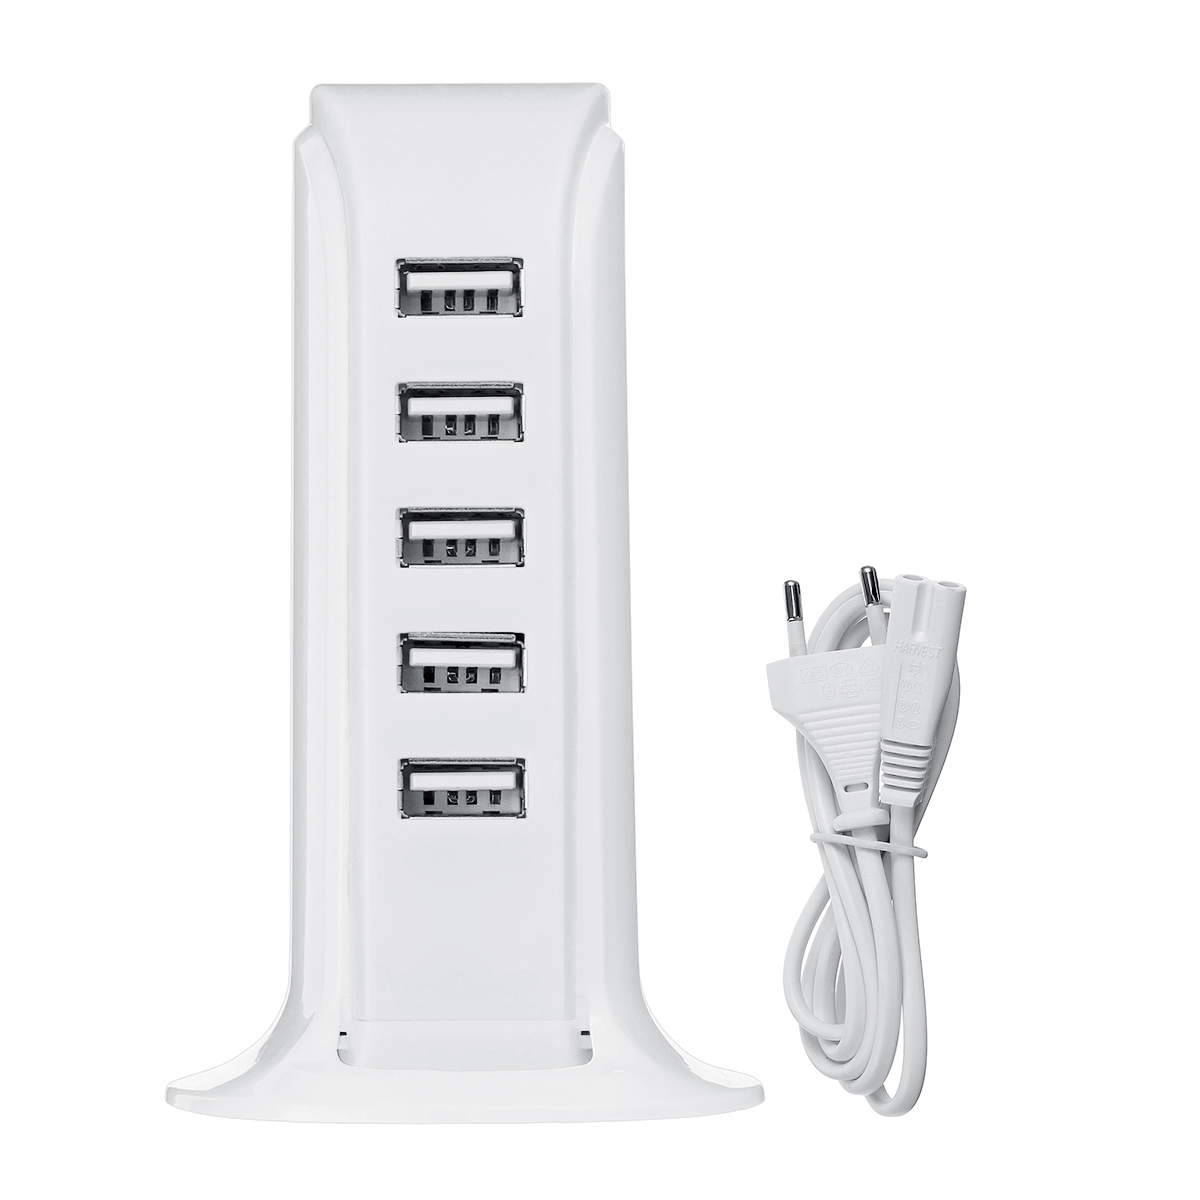 

5 Port 4A USB Desktop Charger Quick Charging Station ABS Stand Charger